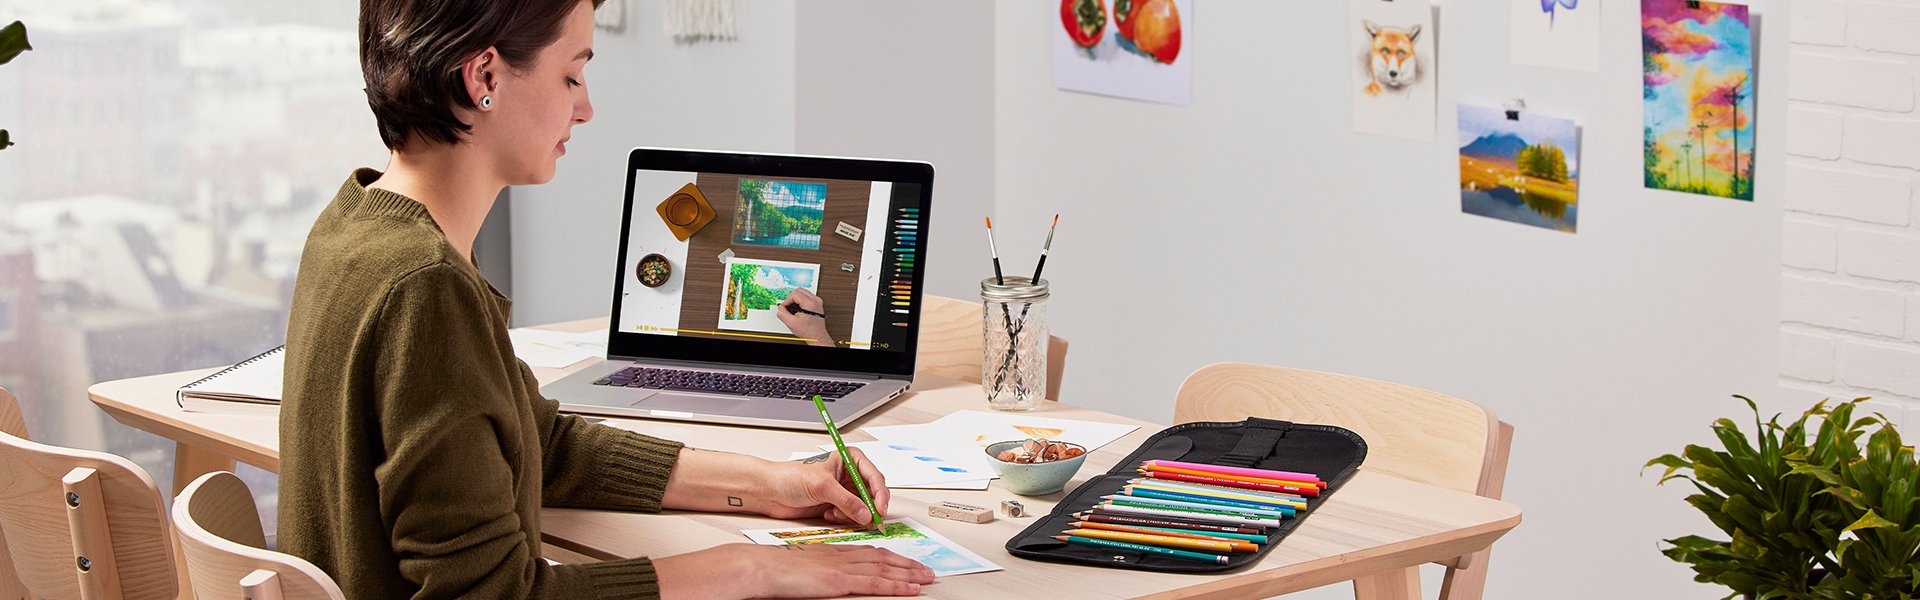 woman drawing with colored pencils with tutorial on laptop